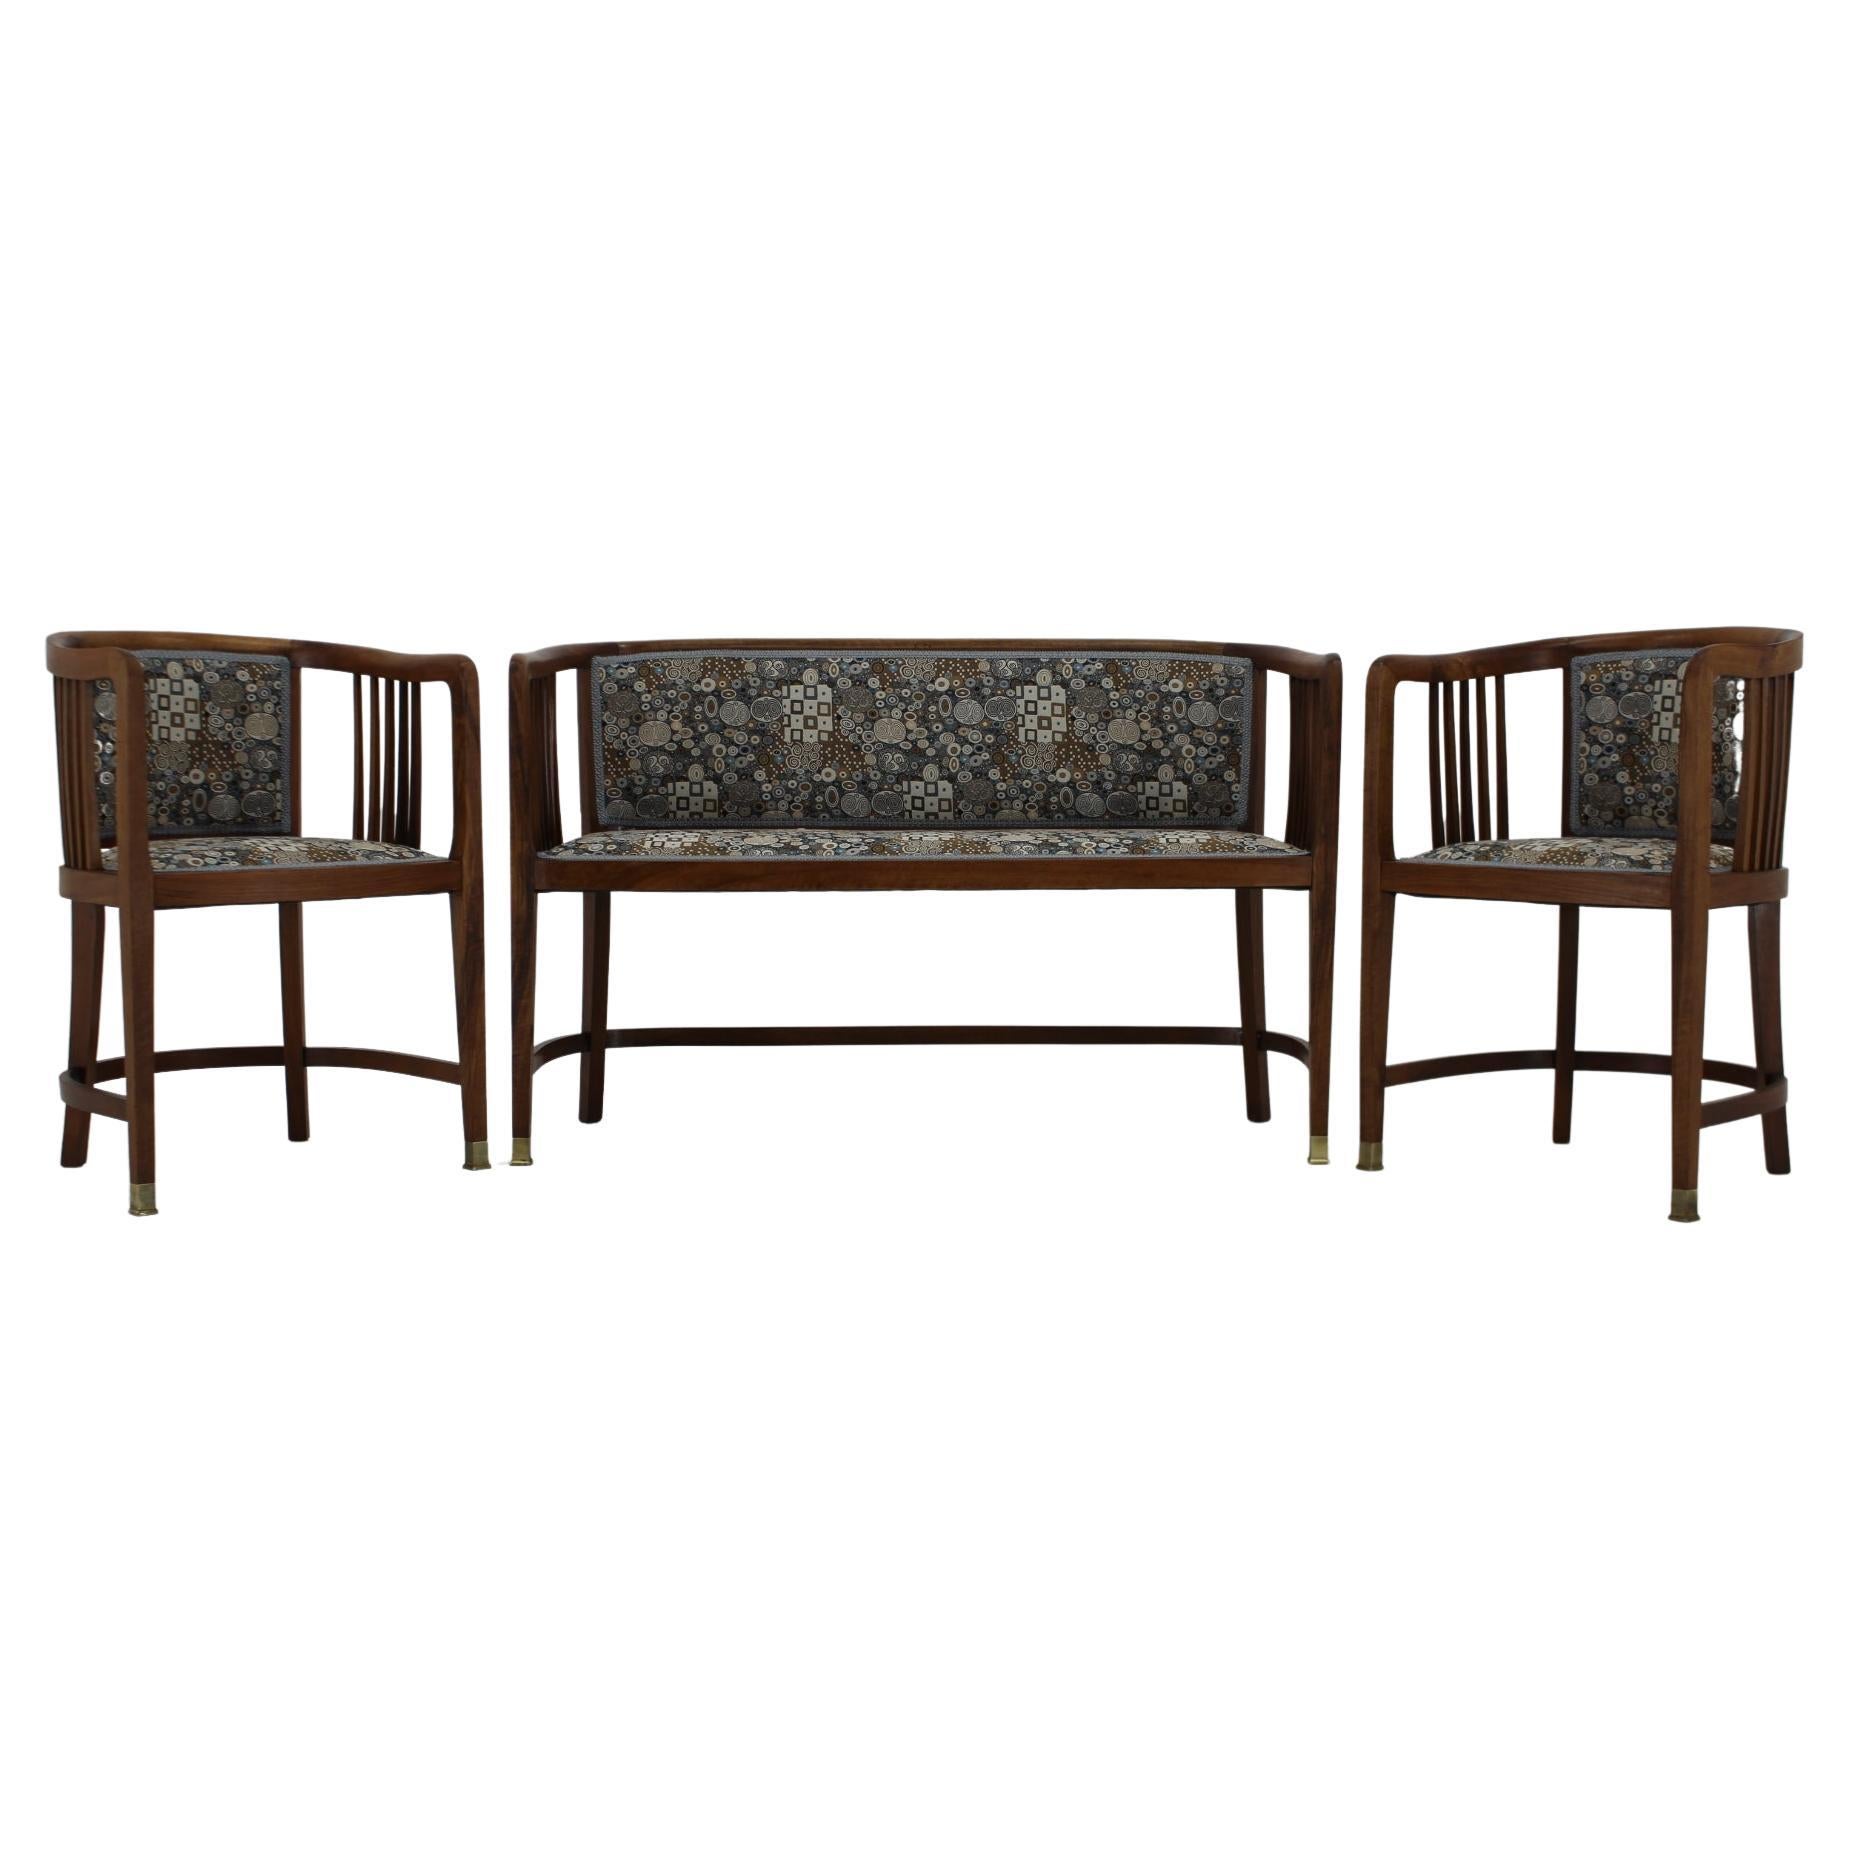 1900s Set of Viennese Secession Sofa and Armachairs in the Style of Josef Maria